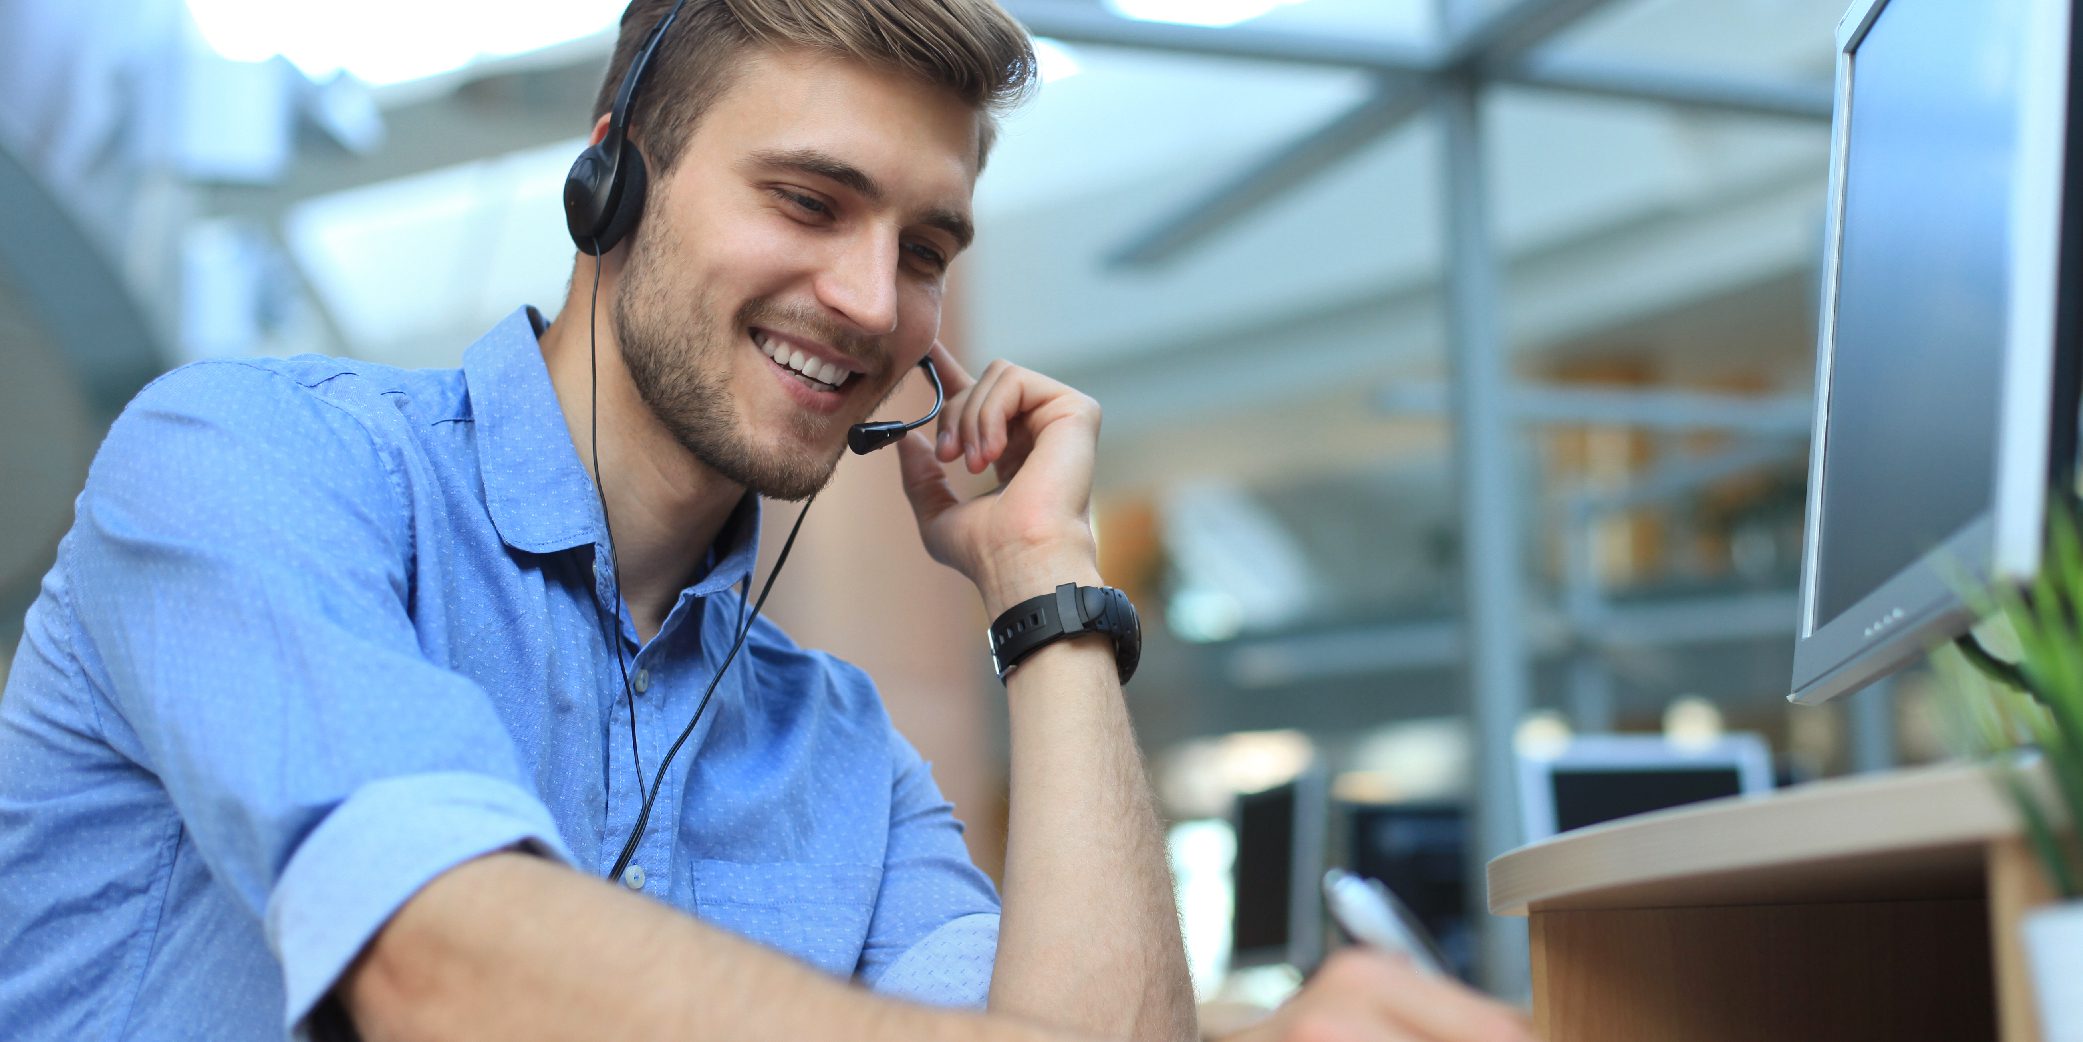 Smiling Friendly Young Businessman in a Call Center, Call Operator